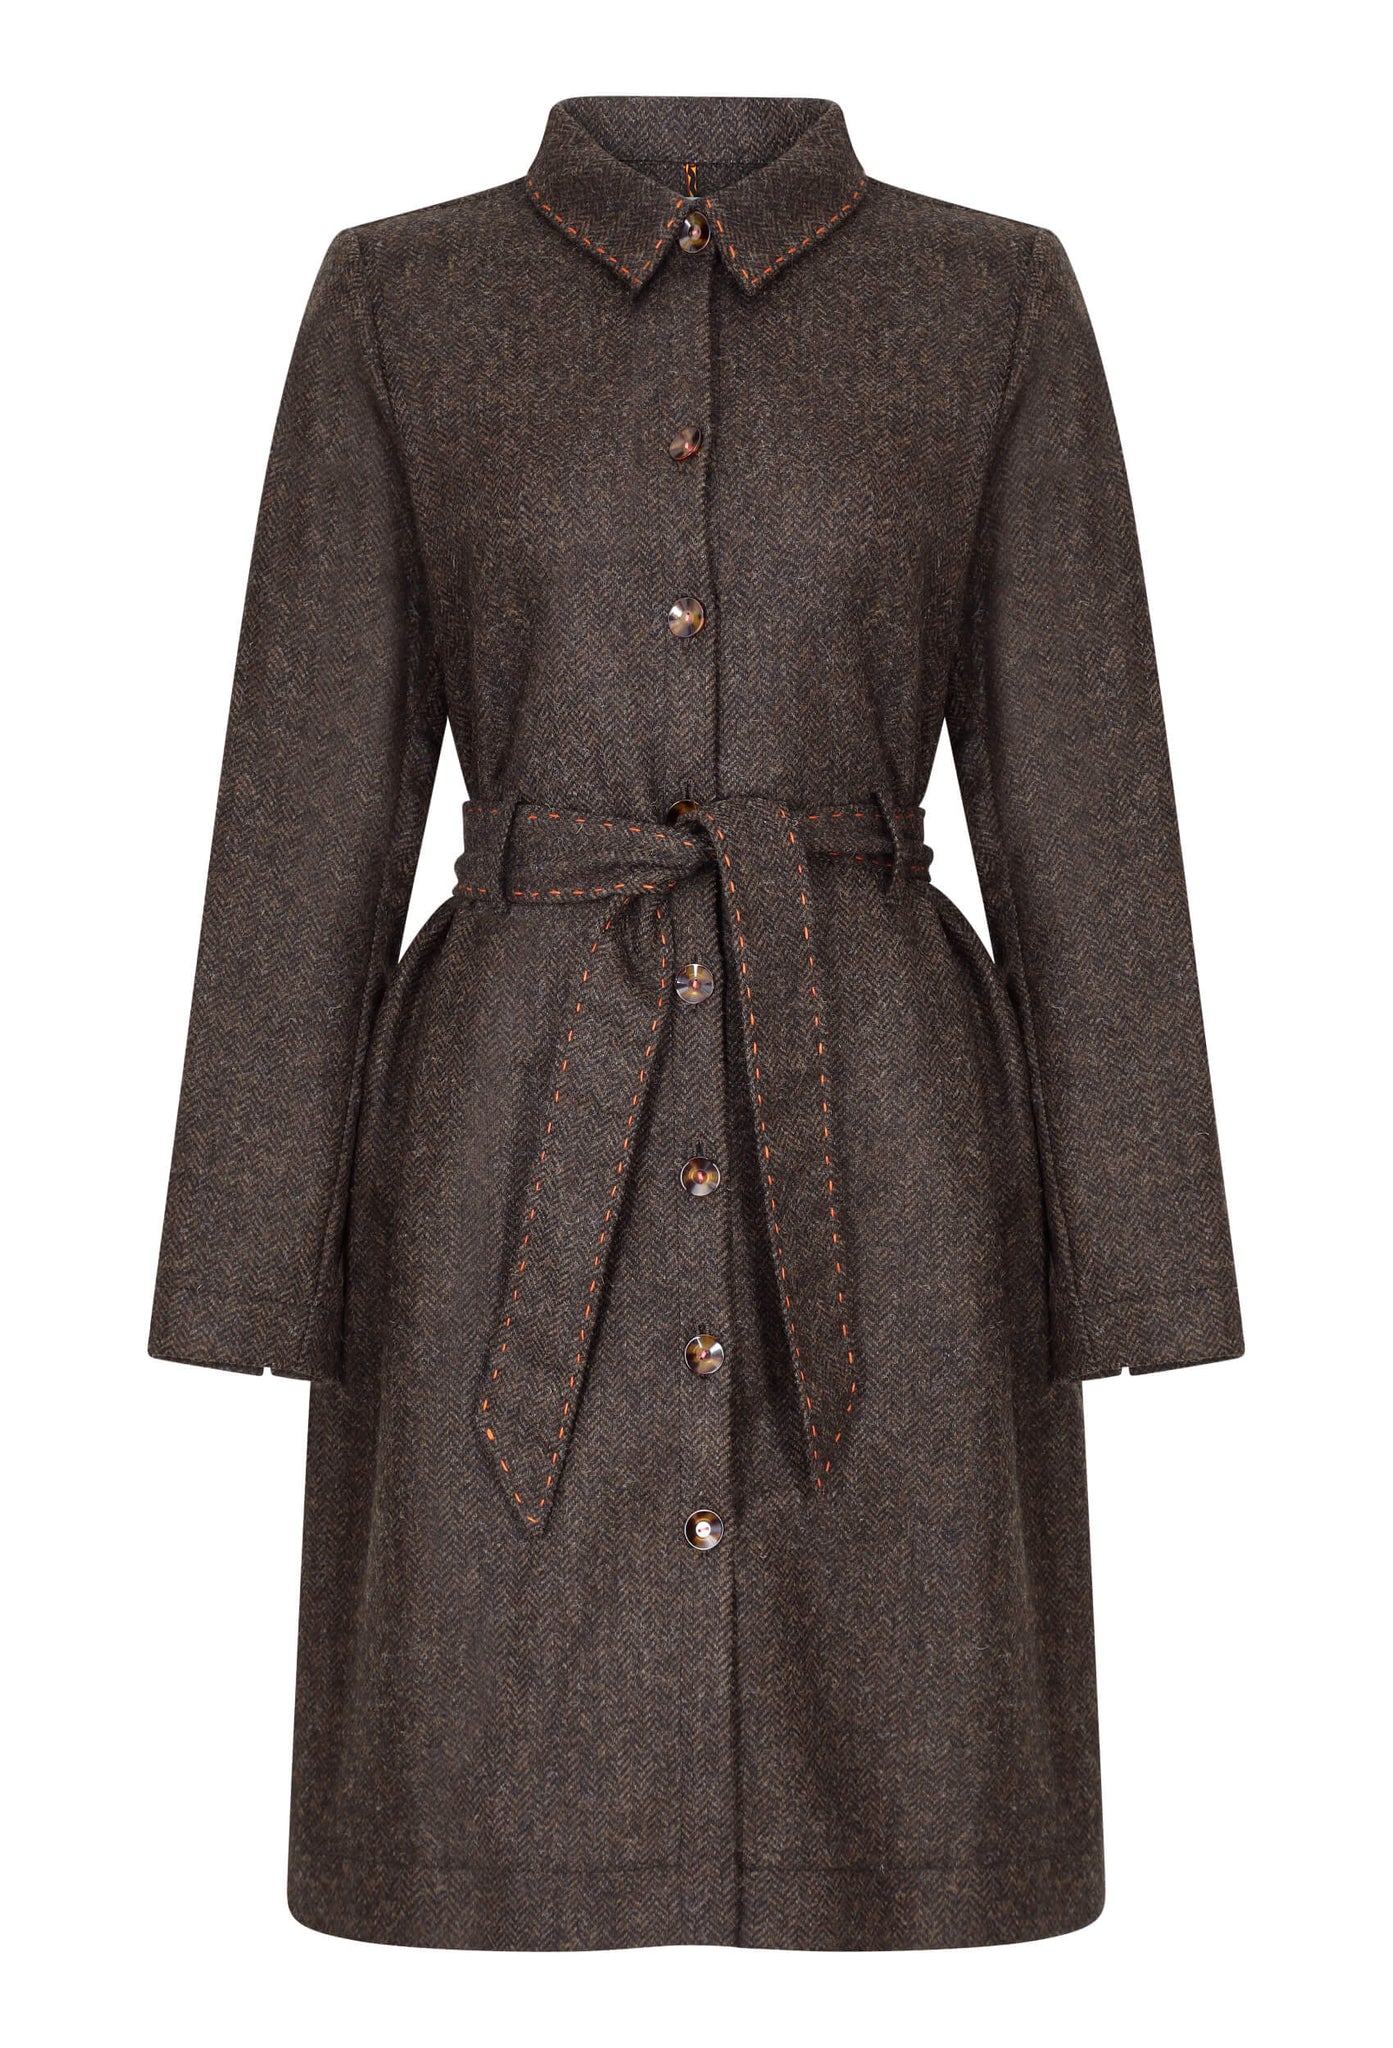 Chocolate Brown Tweed Coat Dress Made From Scottish Tweed – Settlers Stores